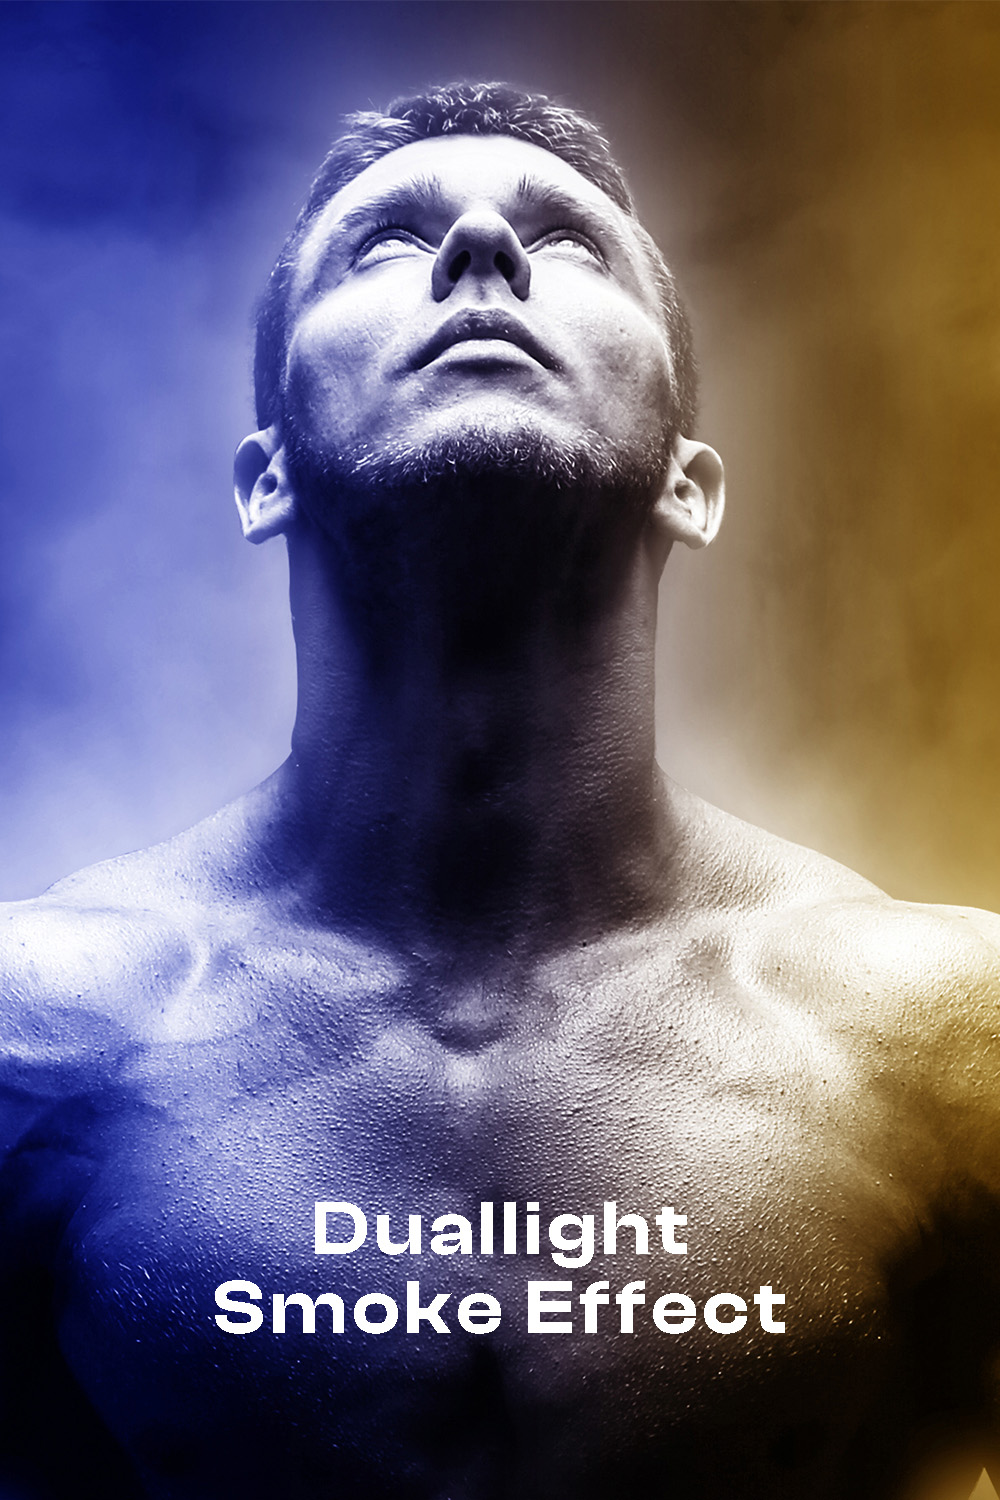 Dual light & smoke photo effects pinterest preview image.